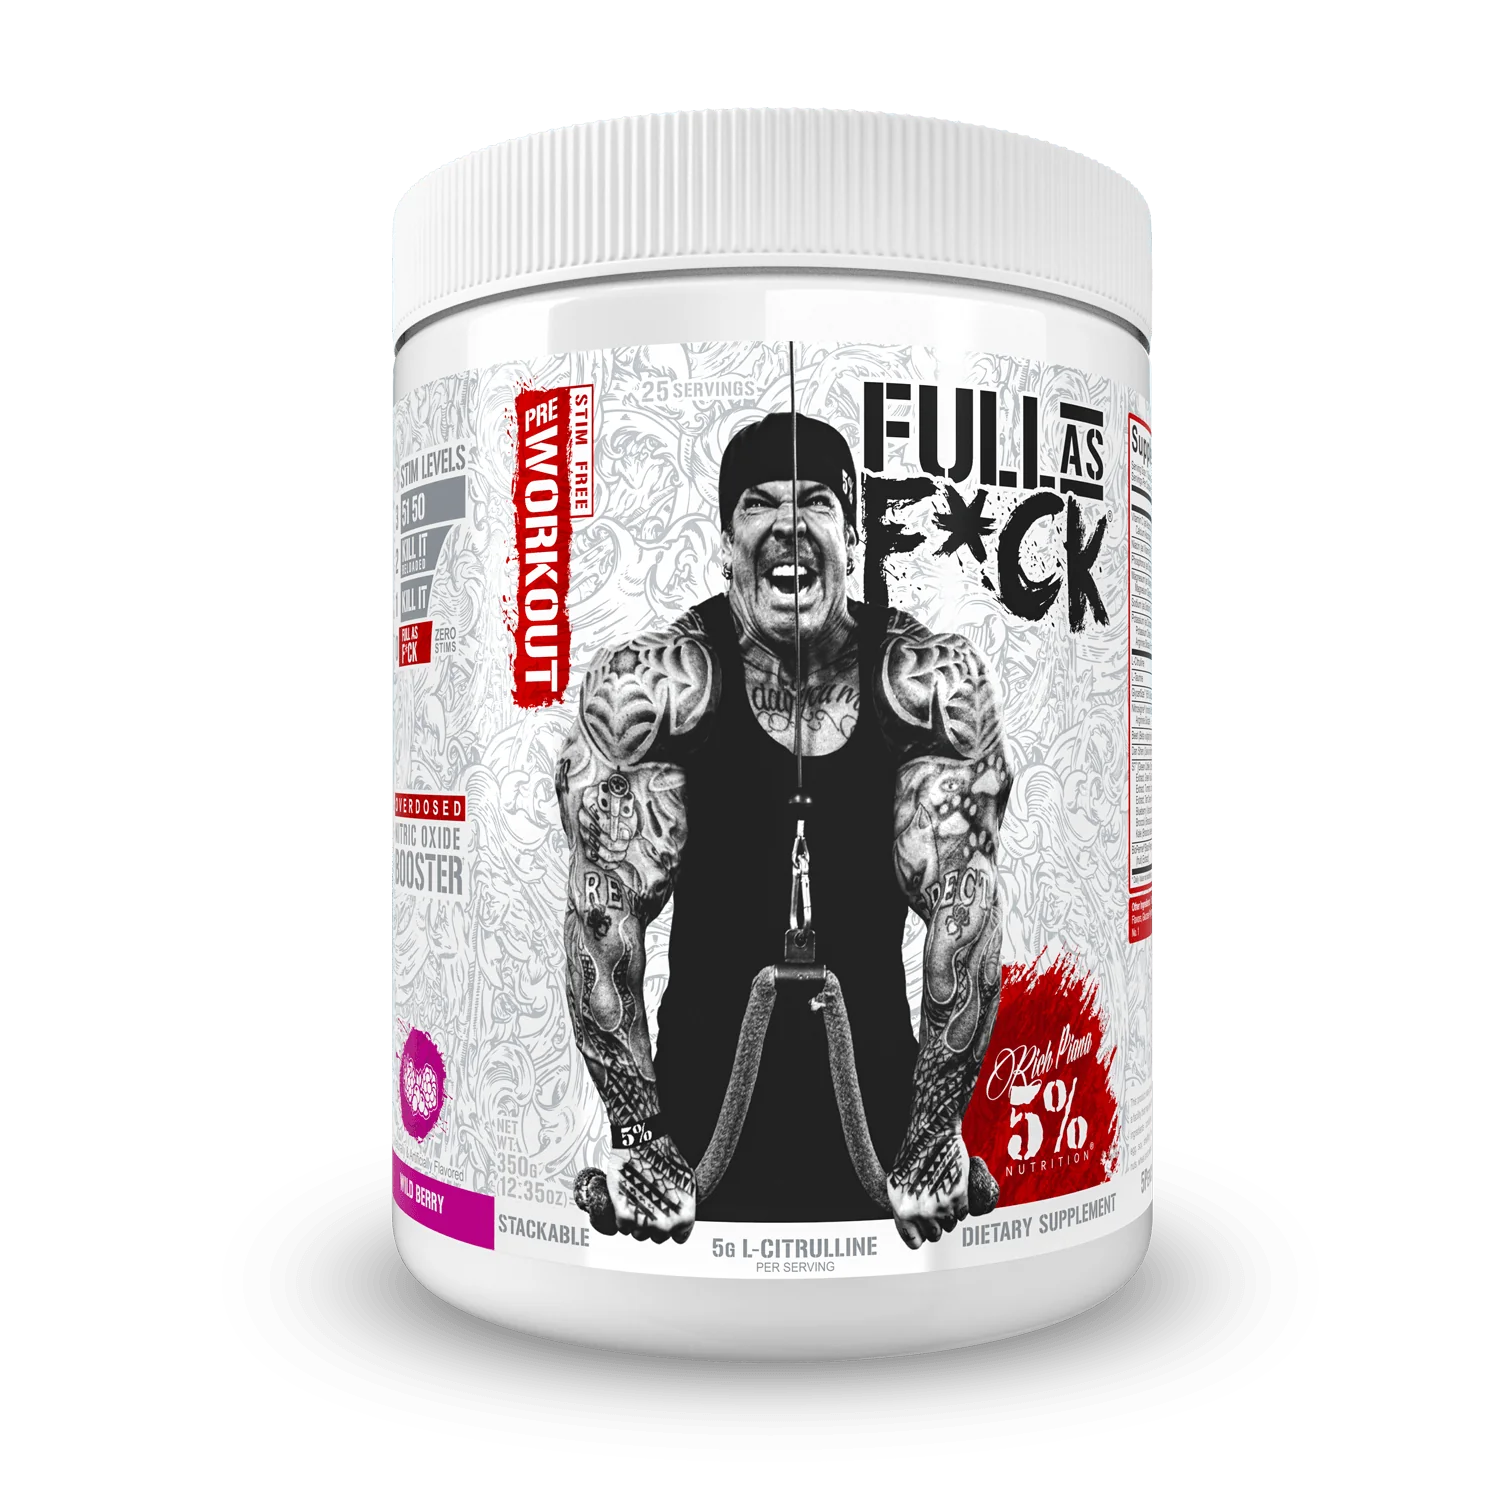 %%full as F stim free pre workout in Ocala nutrition center and Ocala nutrition online stire